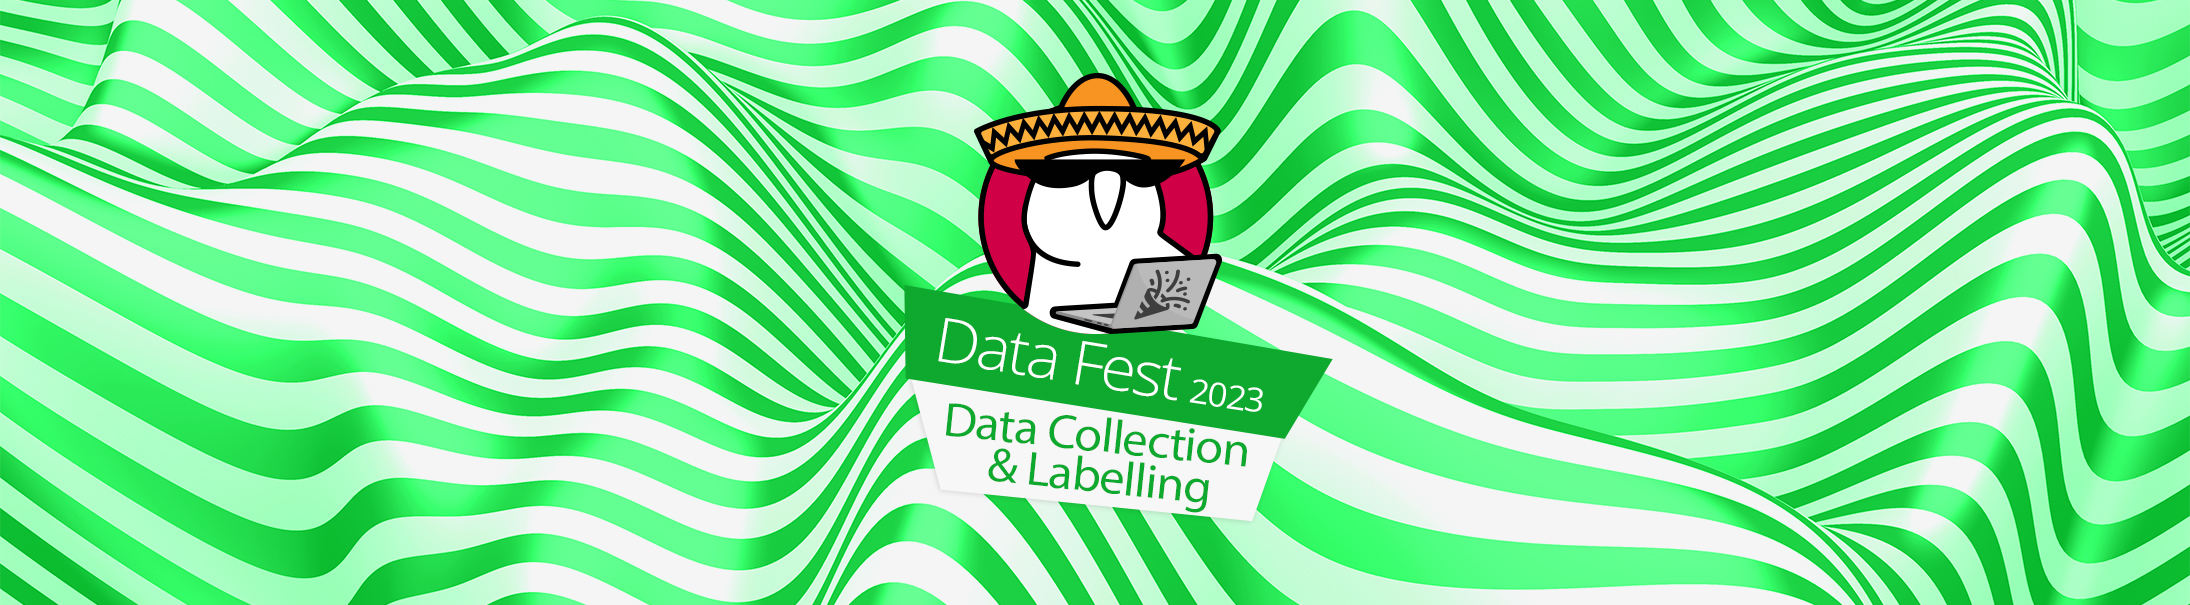 Data Collection & Labelling (Data Fest 2023)